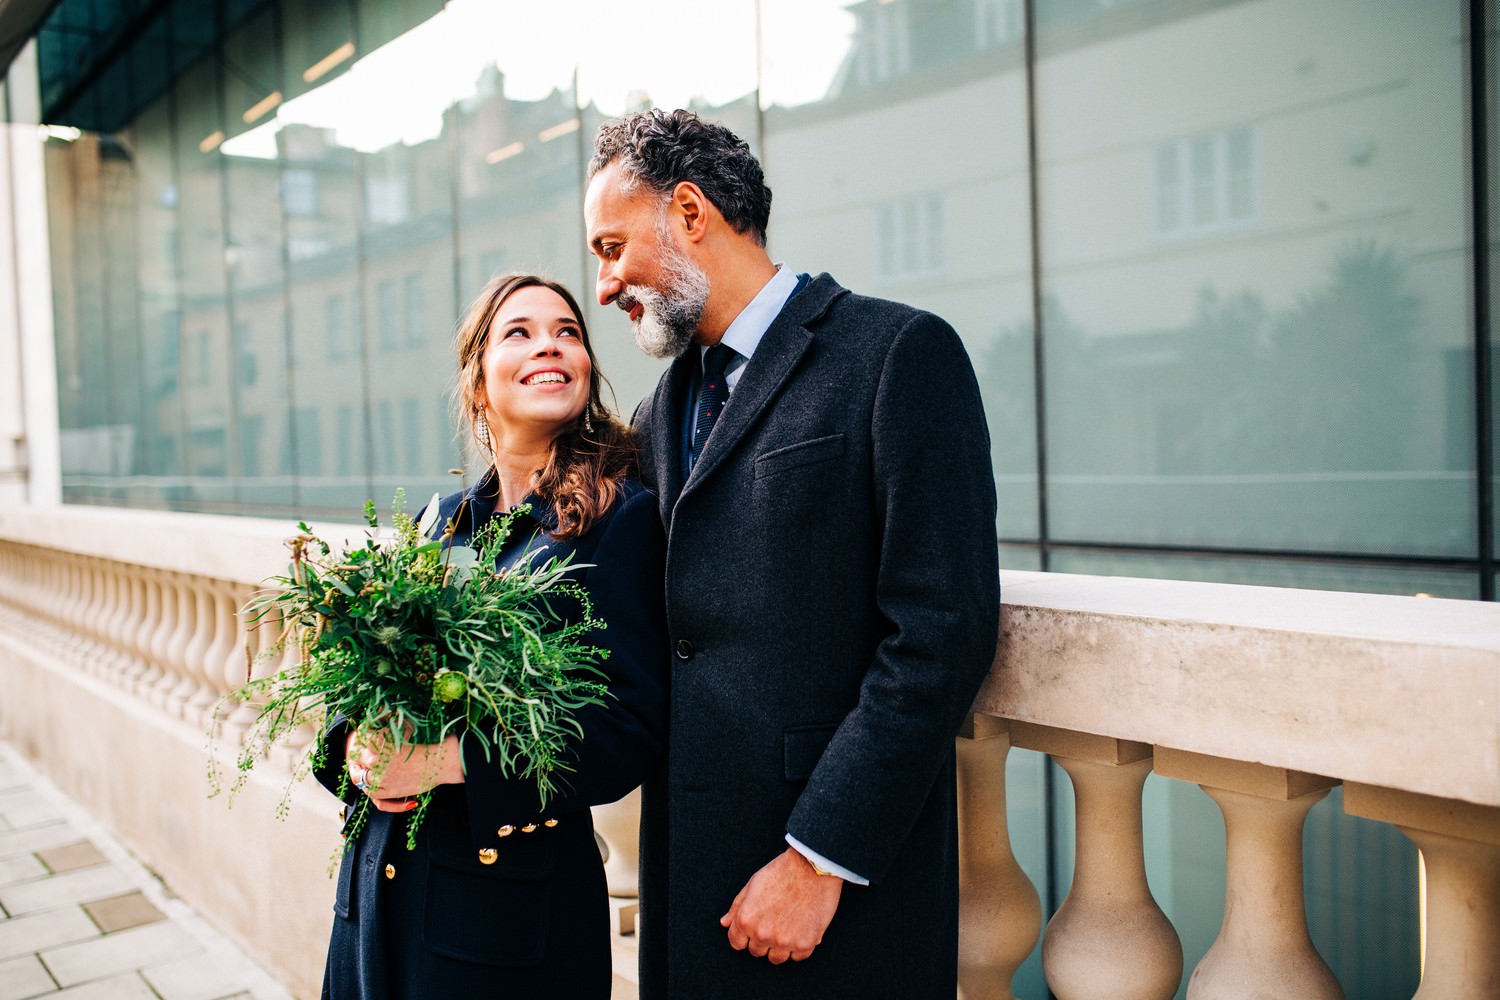 Relaxed Wedding Photography at Jones and Co, London